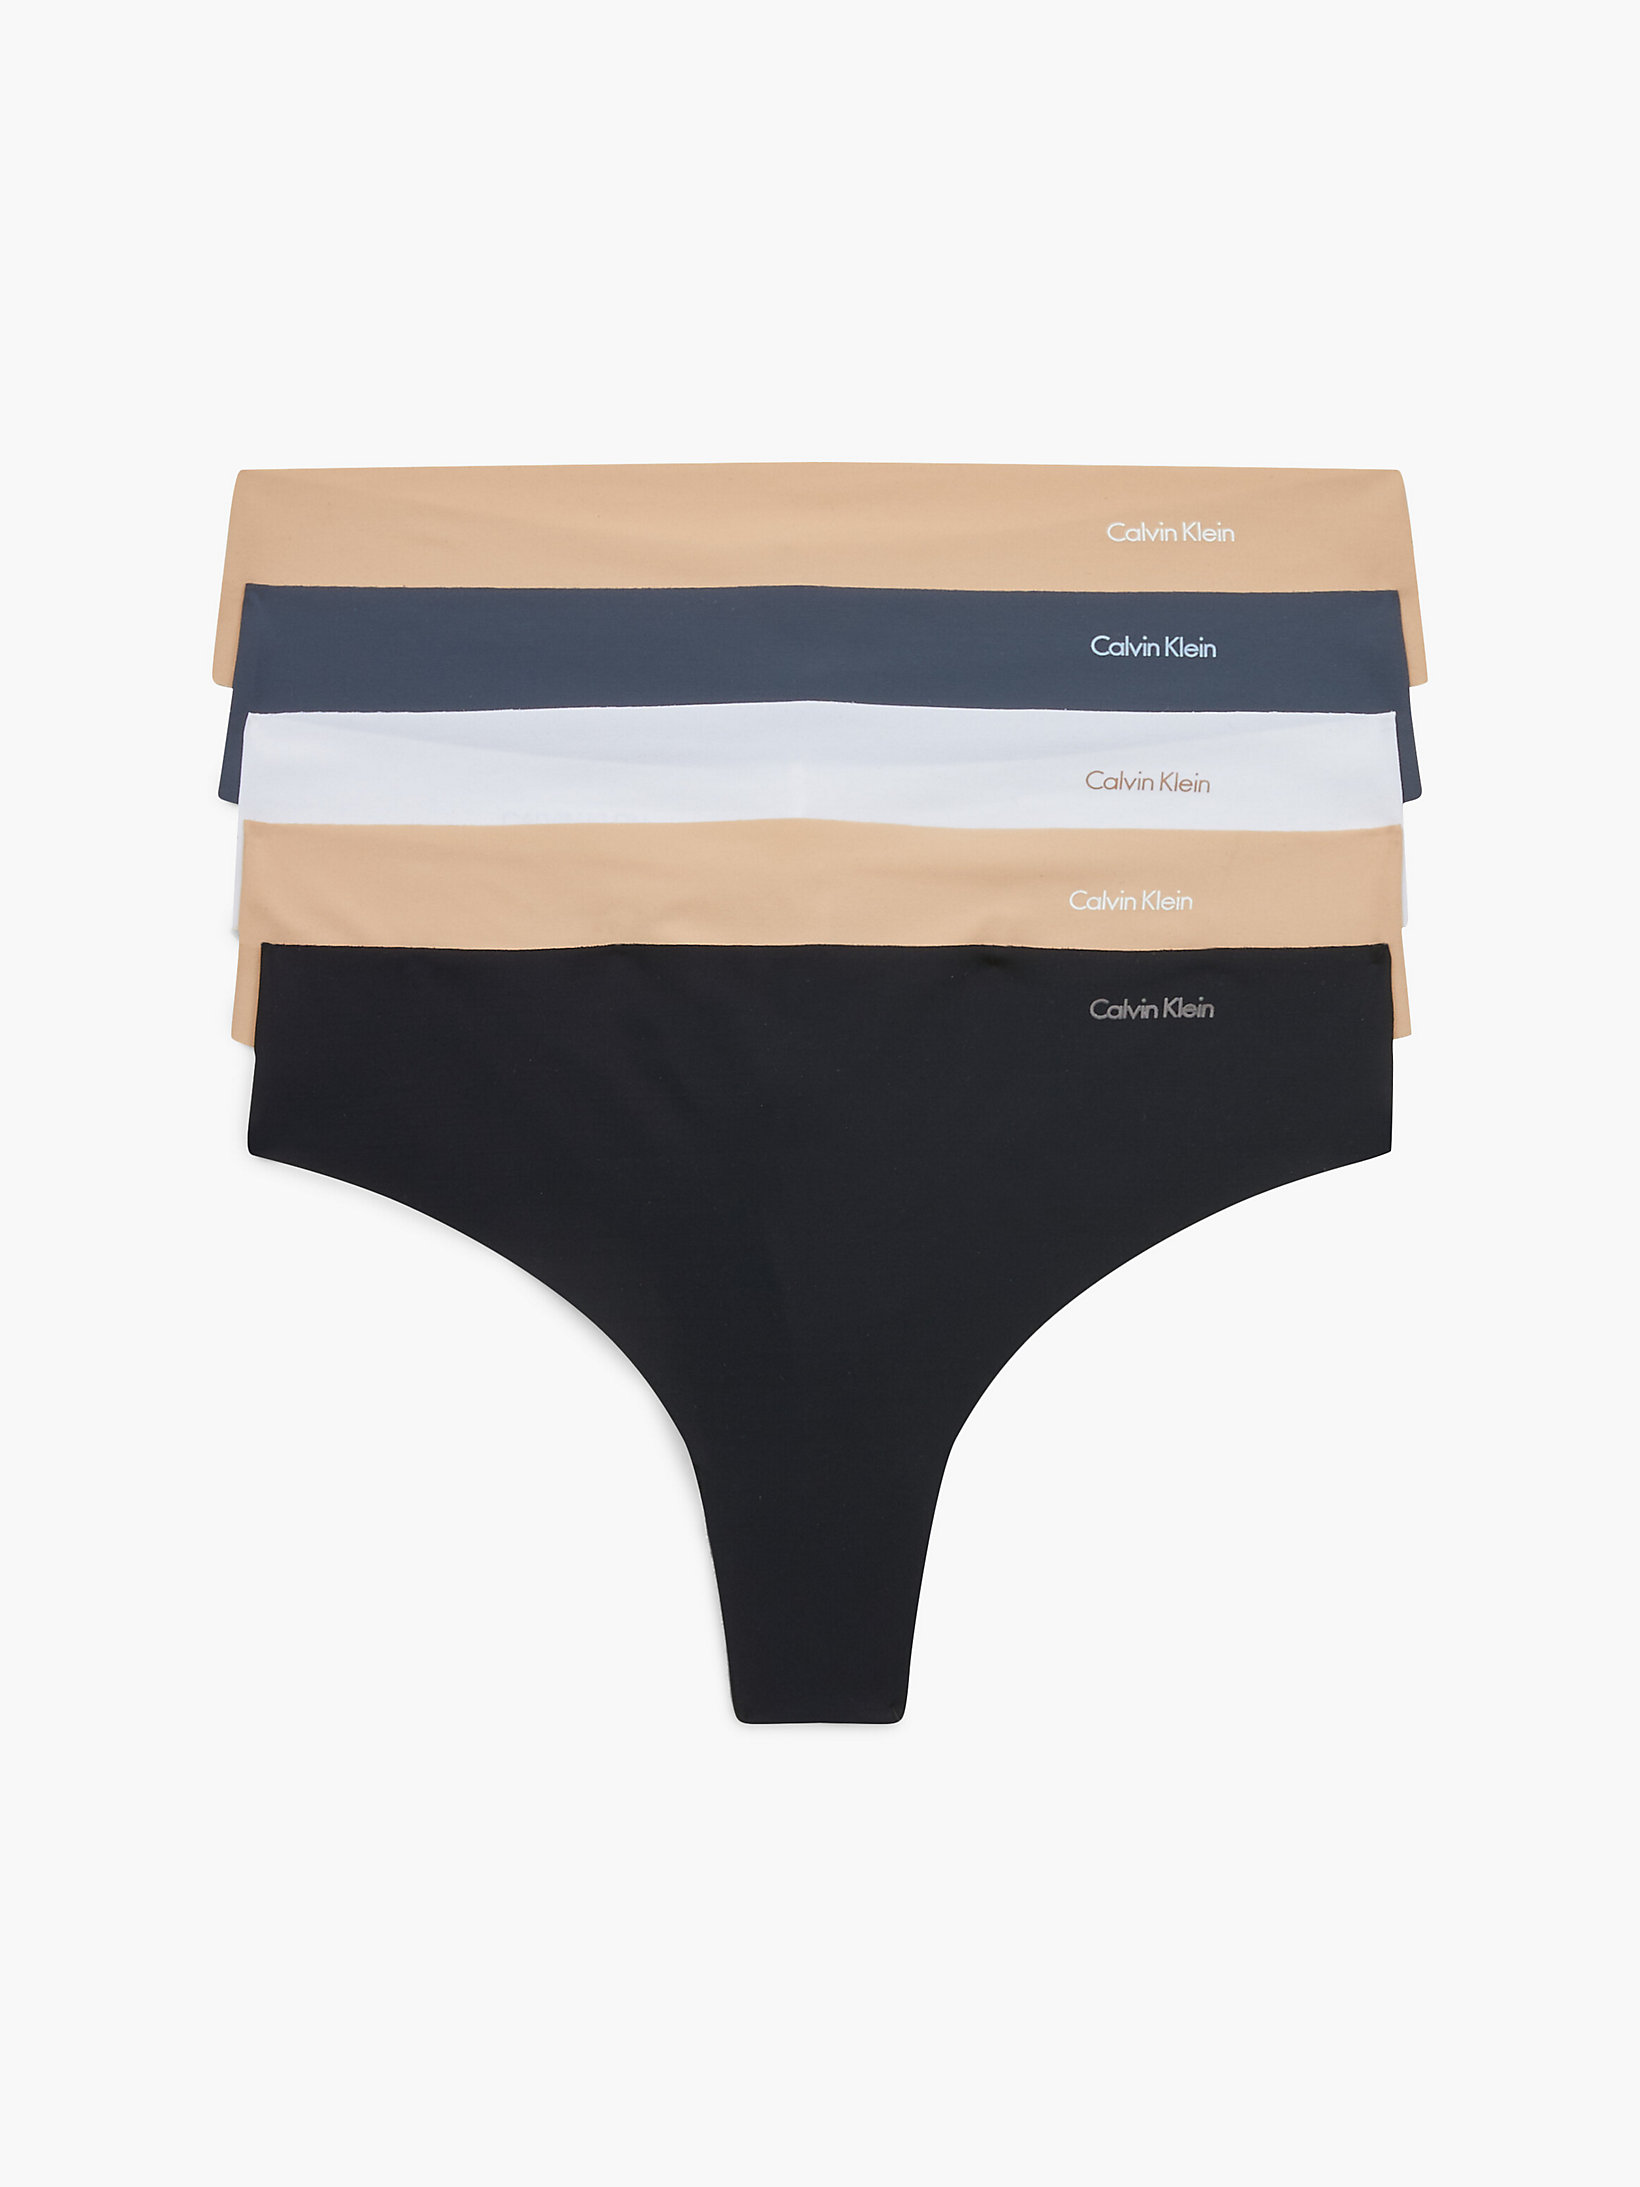 B/s/w/lc/lc 5 Pack Thongs - Invisibles undefined women Calvin Klein